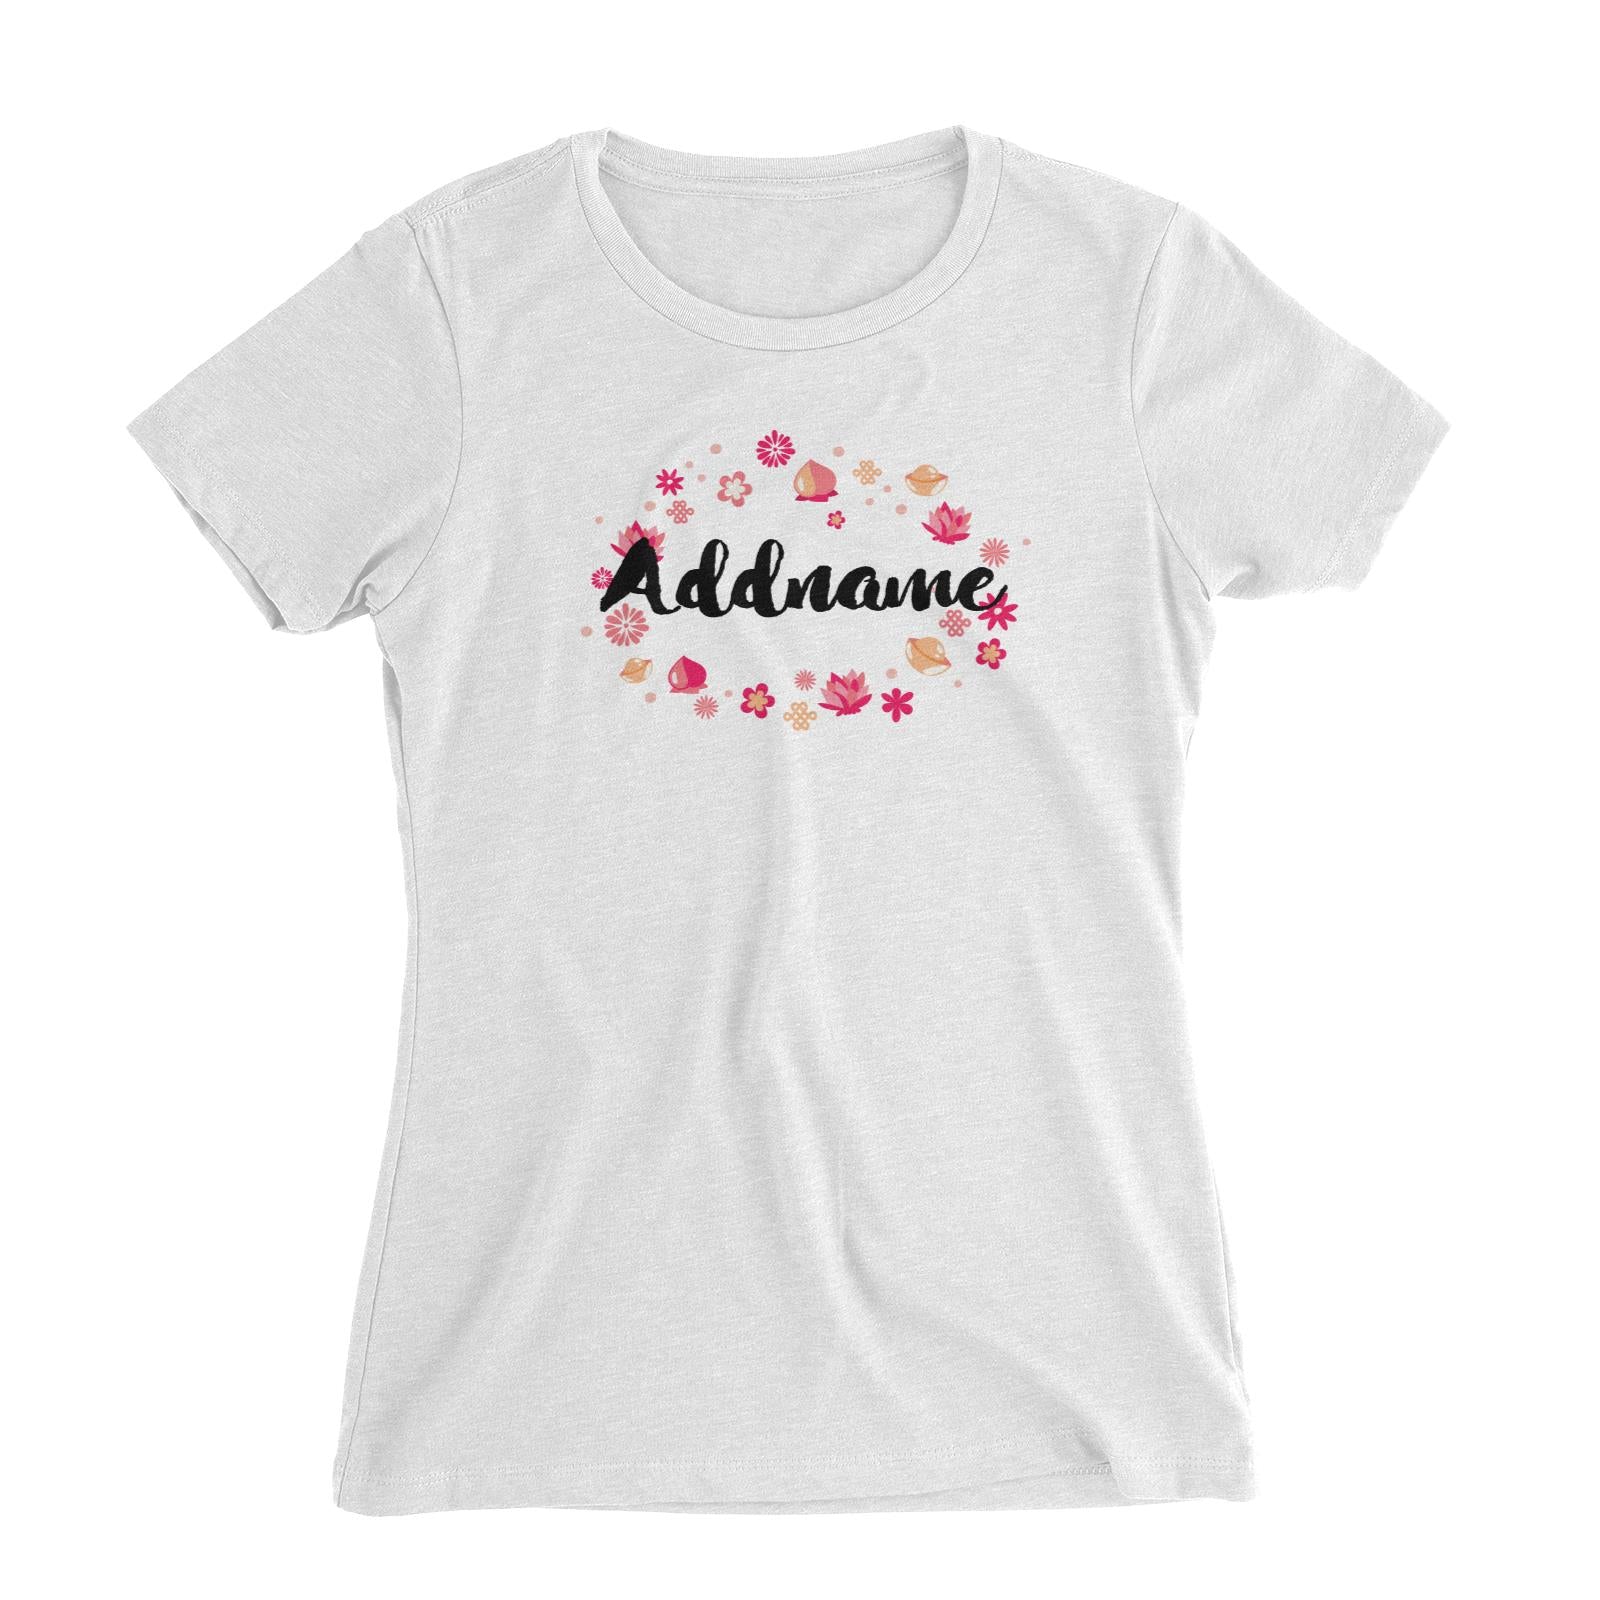 Chinese New Year Addname with Chinese New Year Elements Women's Slim Fit T-Shirt  Personalizable Designs CNY Elements